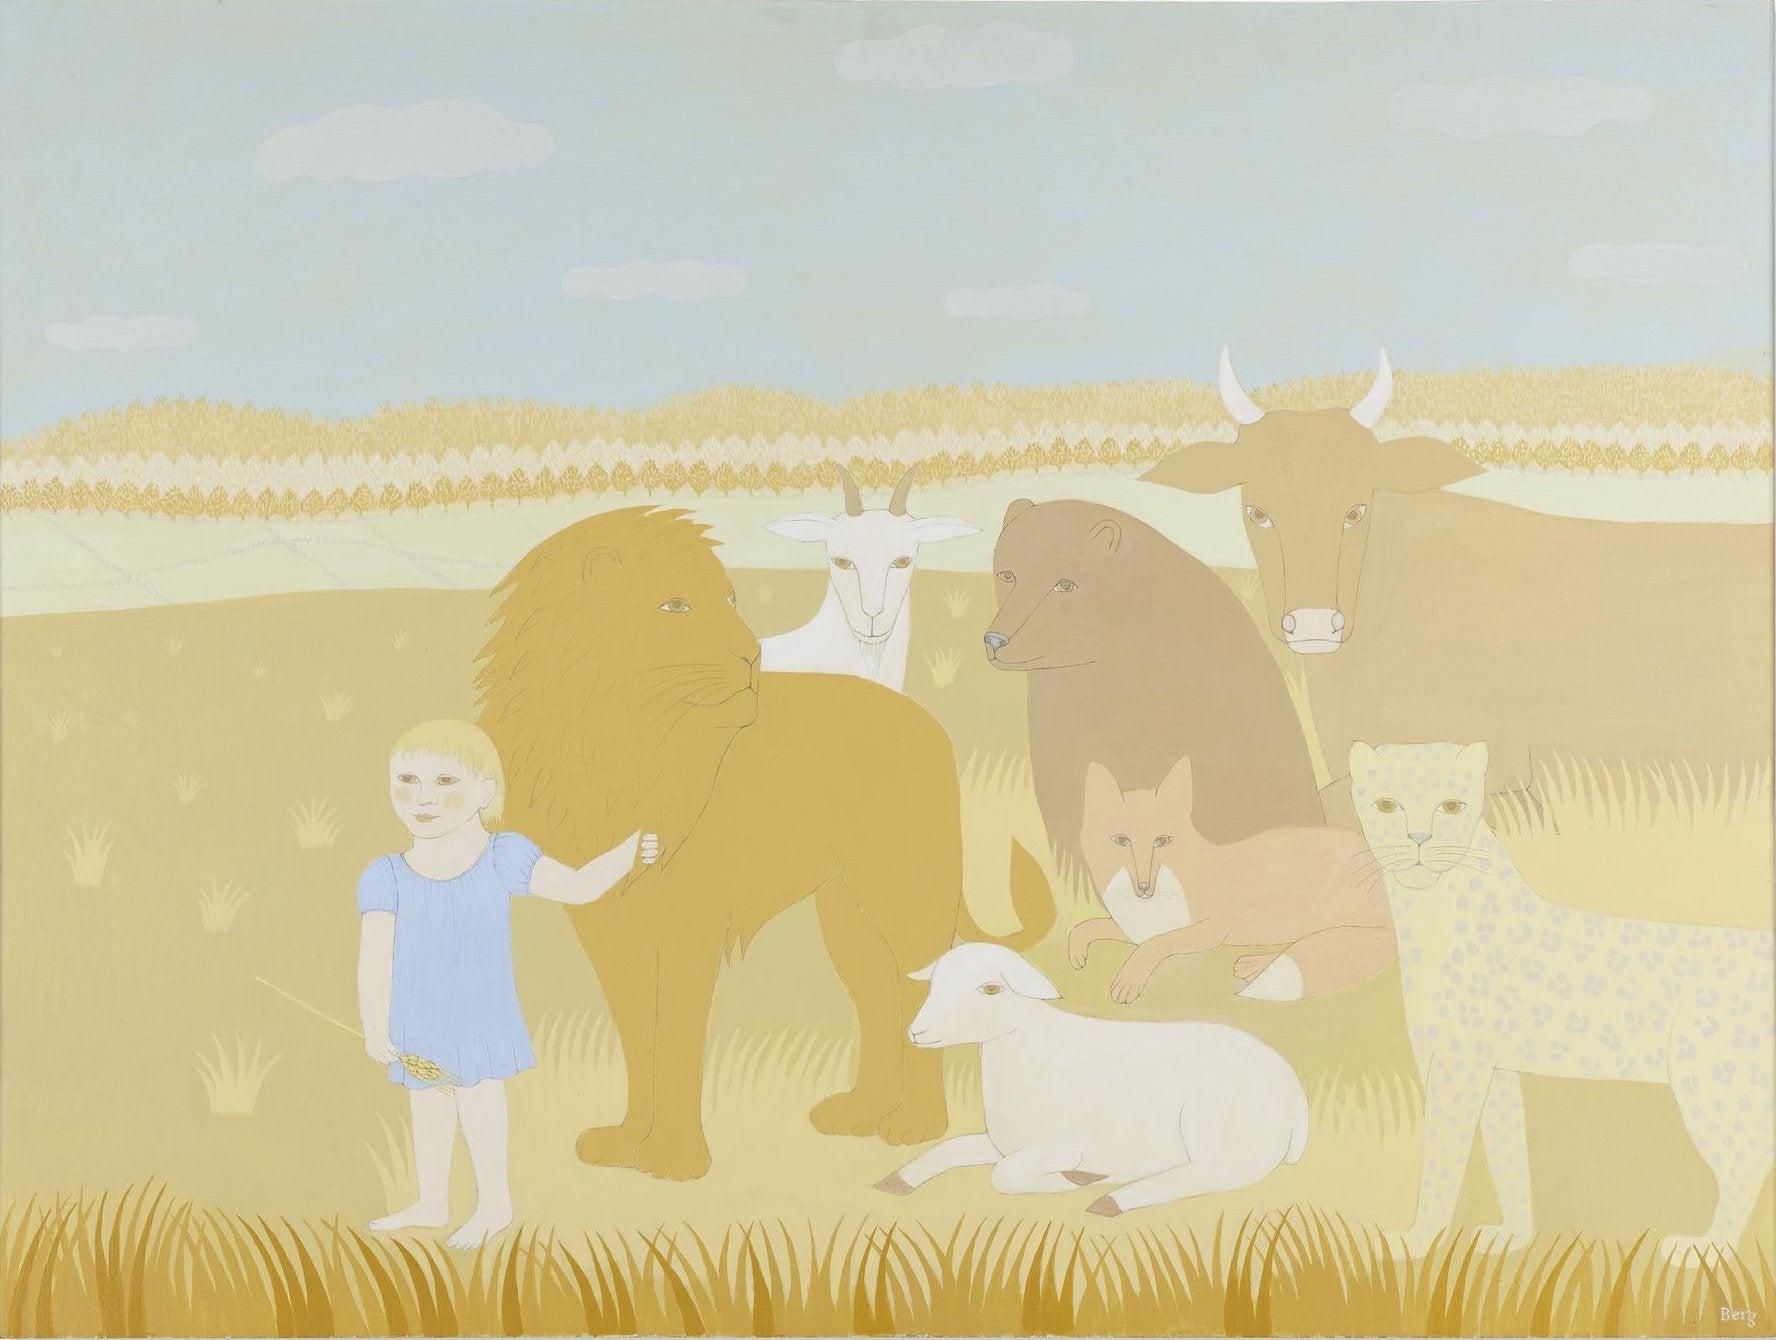 Rosamond Berg
Peaceable Kingdom IV
1974/76
Acrylic and graphite on canvas
36 h × 48 w in (91 × 122 cm)
Signed, titled and dated to verso 'Rosamond Berg Peaceable Kingdom IV 1974'.

This painting depicting a little girl amongst a cow, lion, fox,